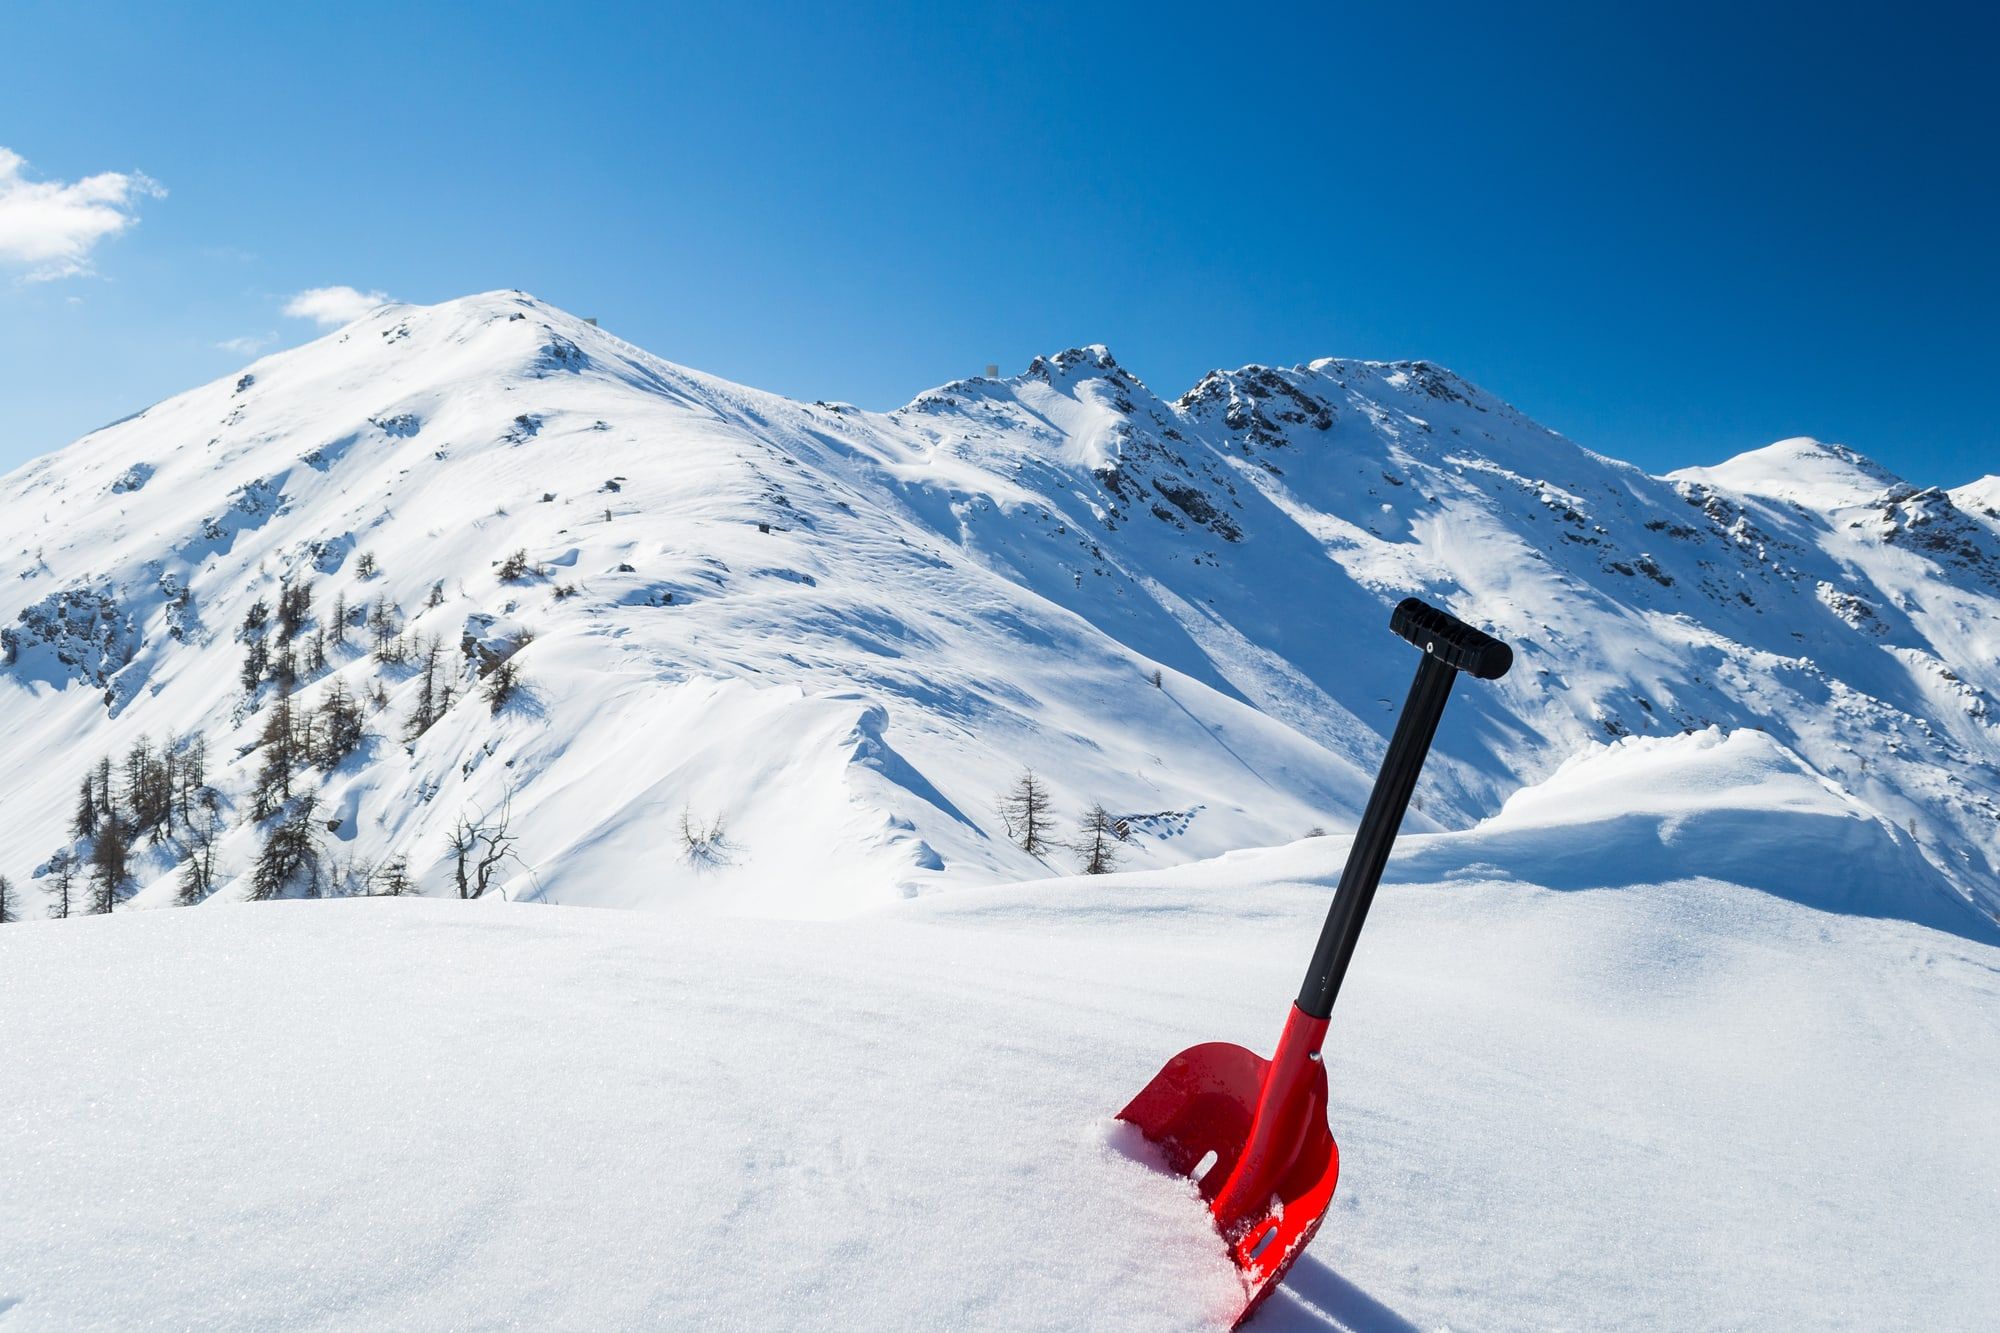 Red avalanche shovel in powder fresh snow. Scenic snowcapped high mountain background. Winter season in the italian Alps.